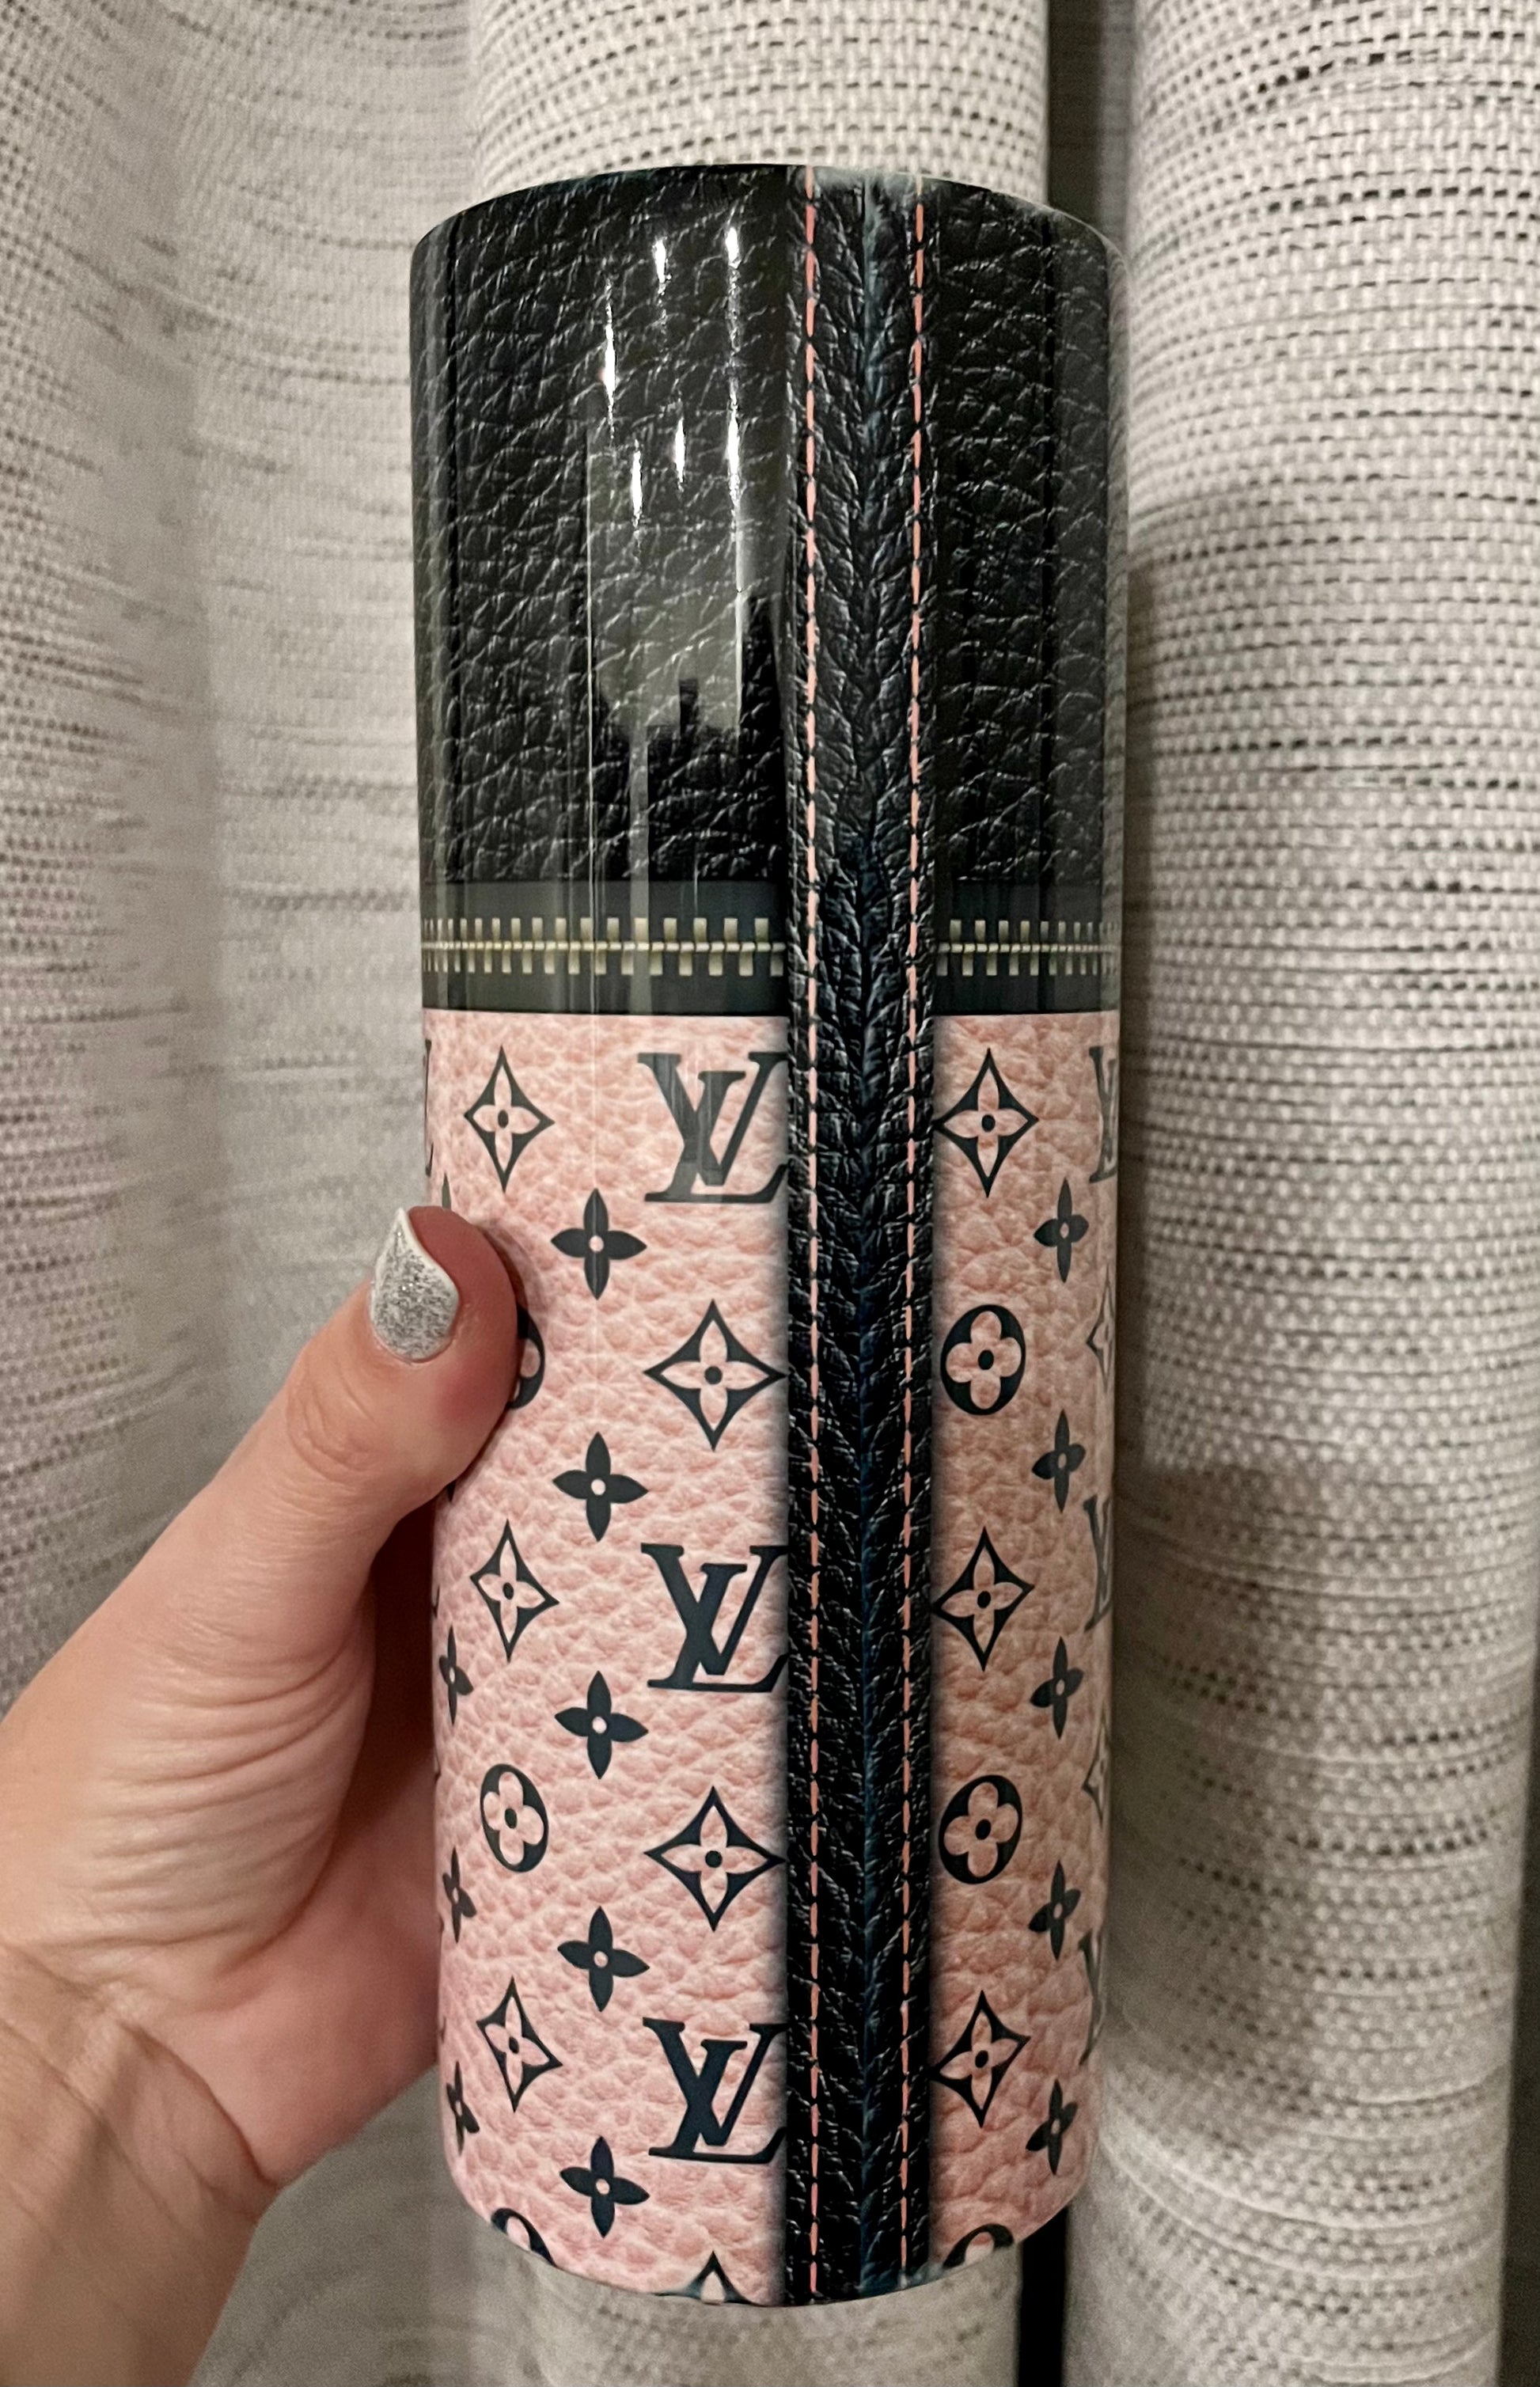 LV inspired tumbler – let's get ready to tumblr